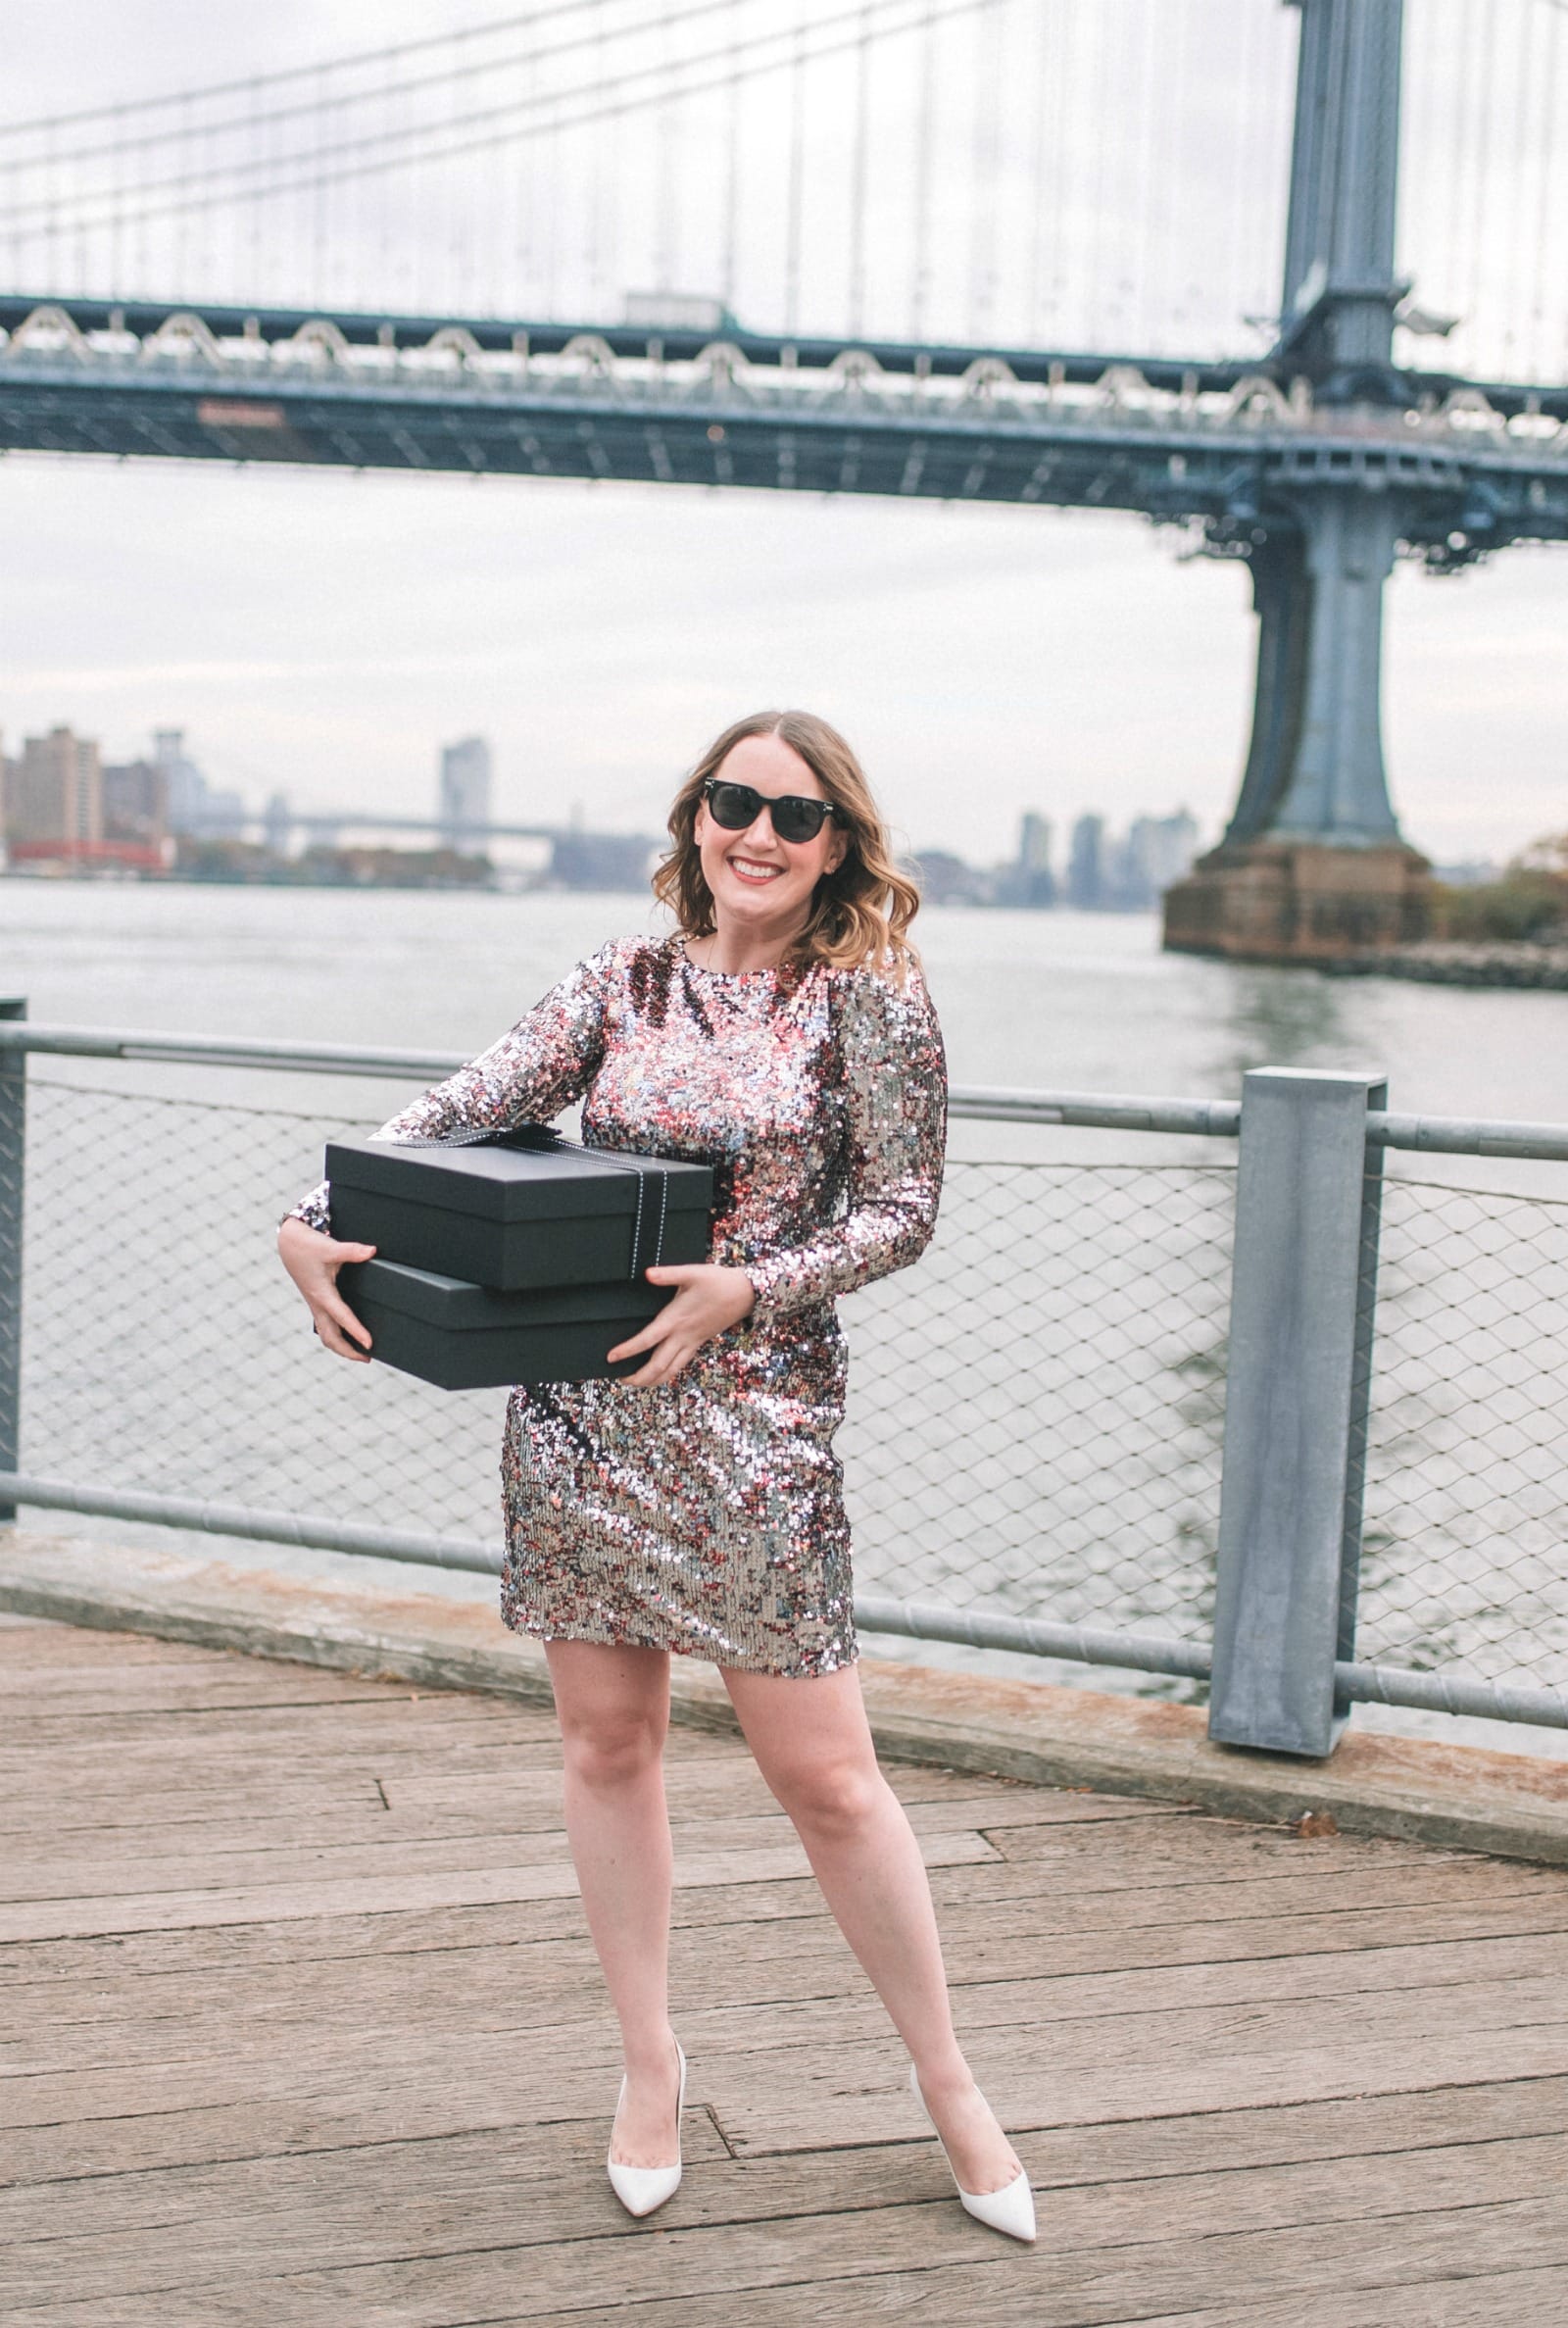 2019 NYC Holiday Bucket List I wit & whimsy